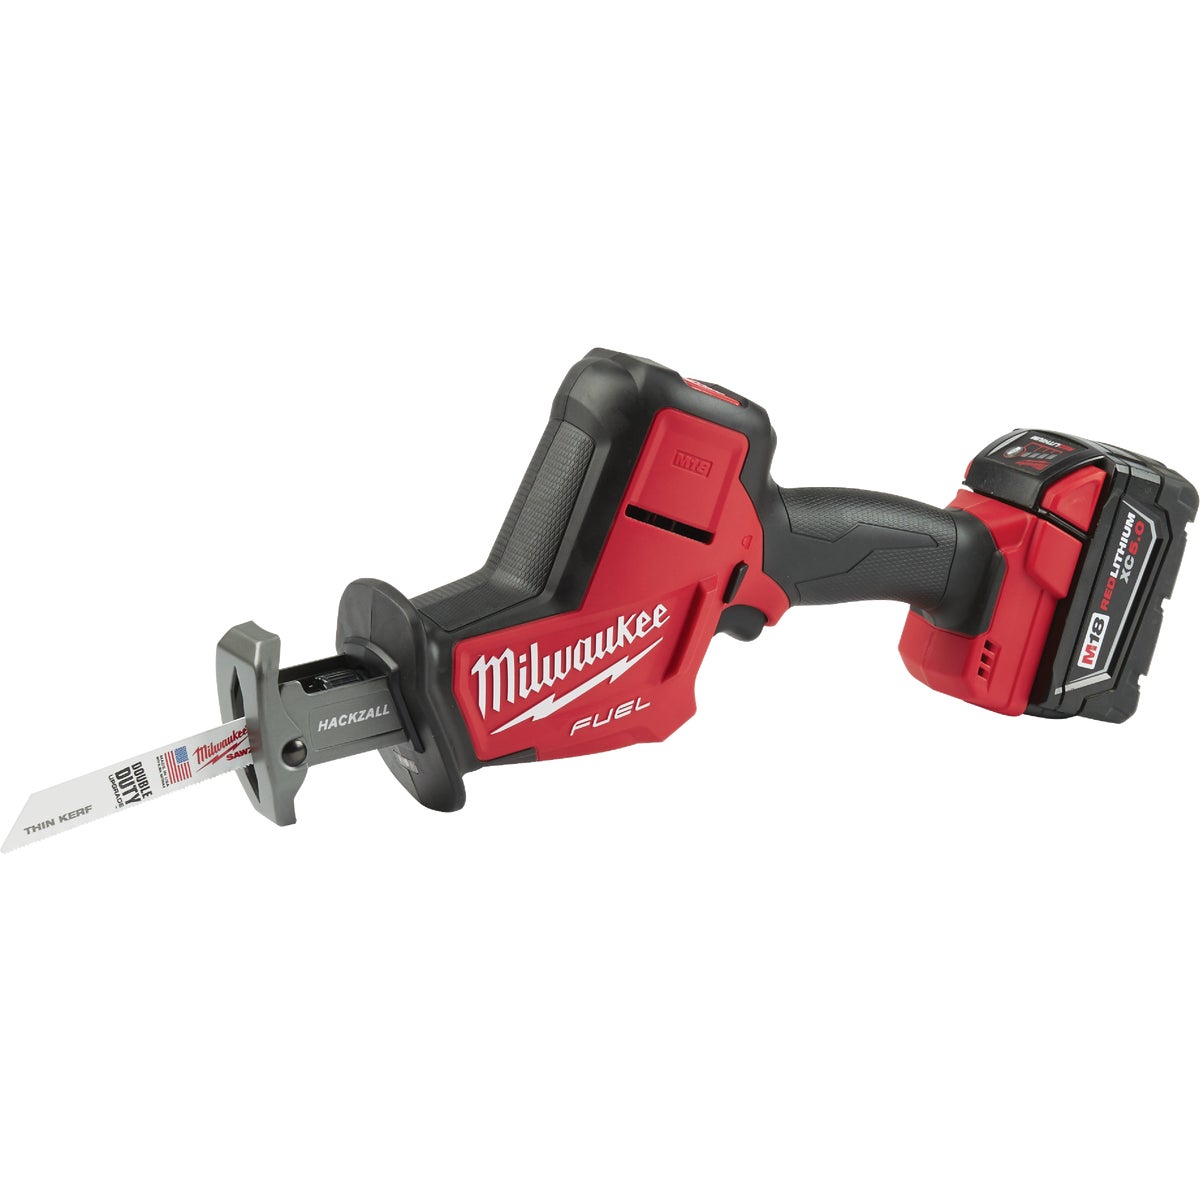 Item 303413, The Milwaukee M18 FUEL HACKZALL is the fastest cutting and most powerful 